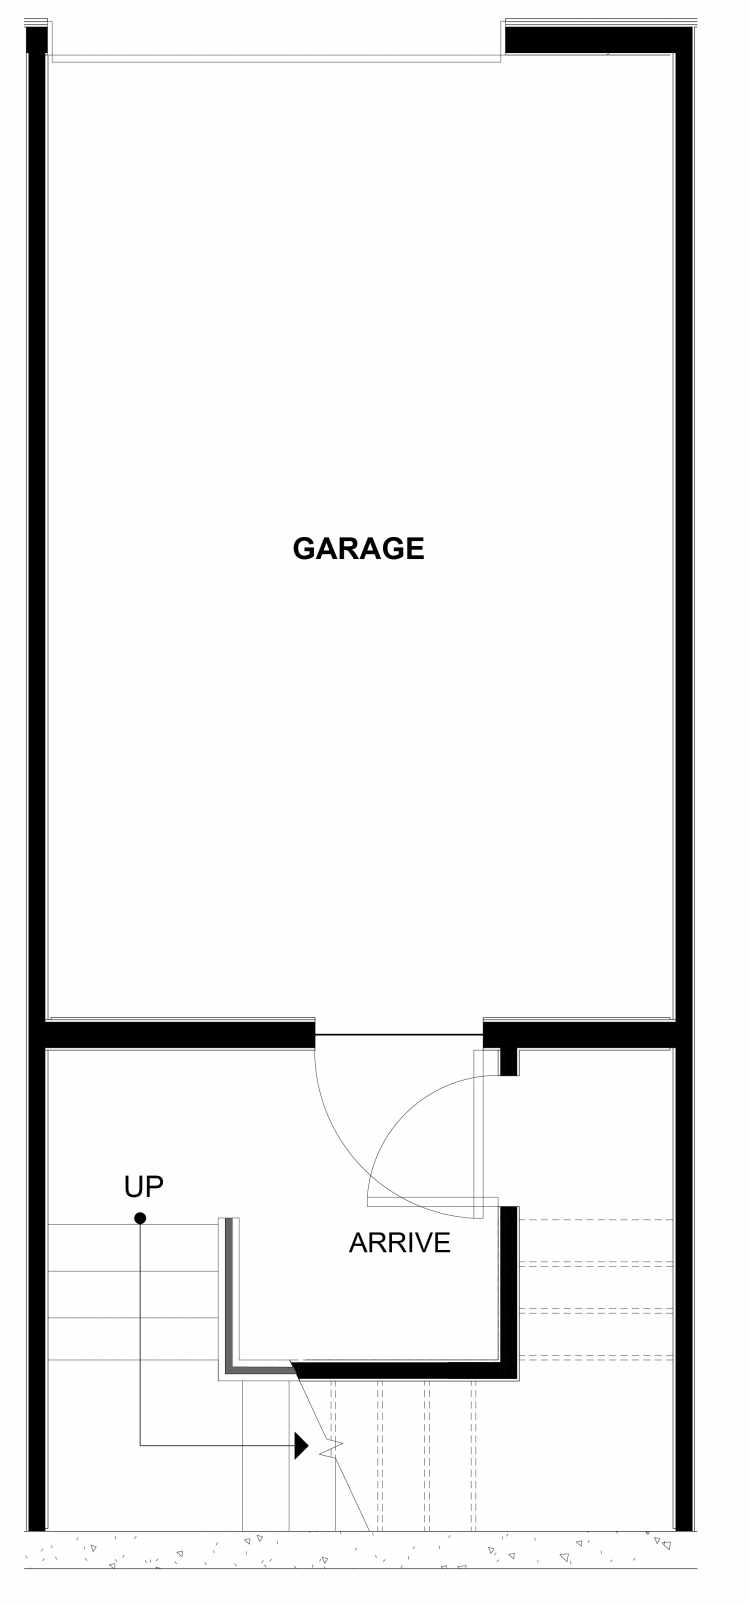 First Floor Plan of 1542 15th Ave E, One of the Larrabee Townhomes in Capitol Hill